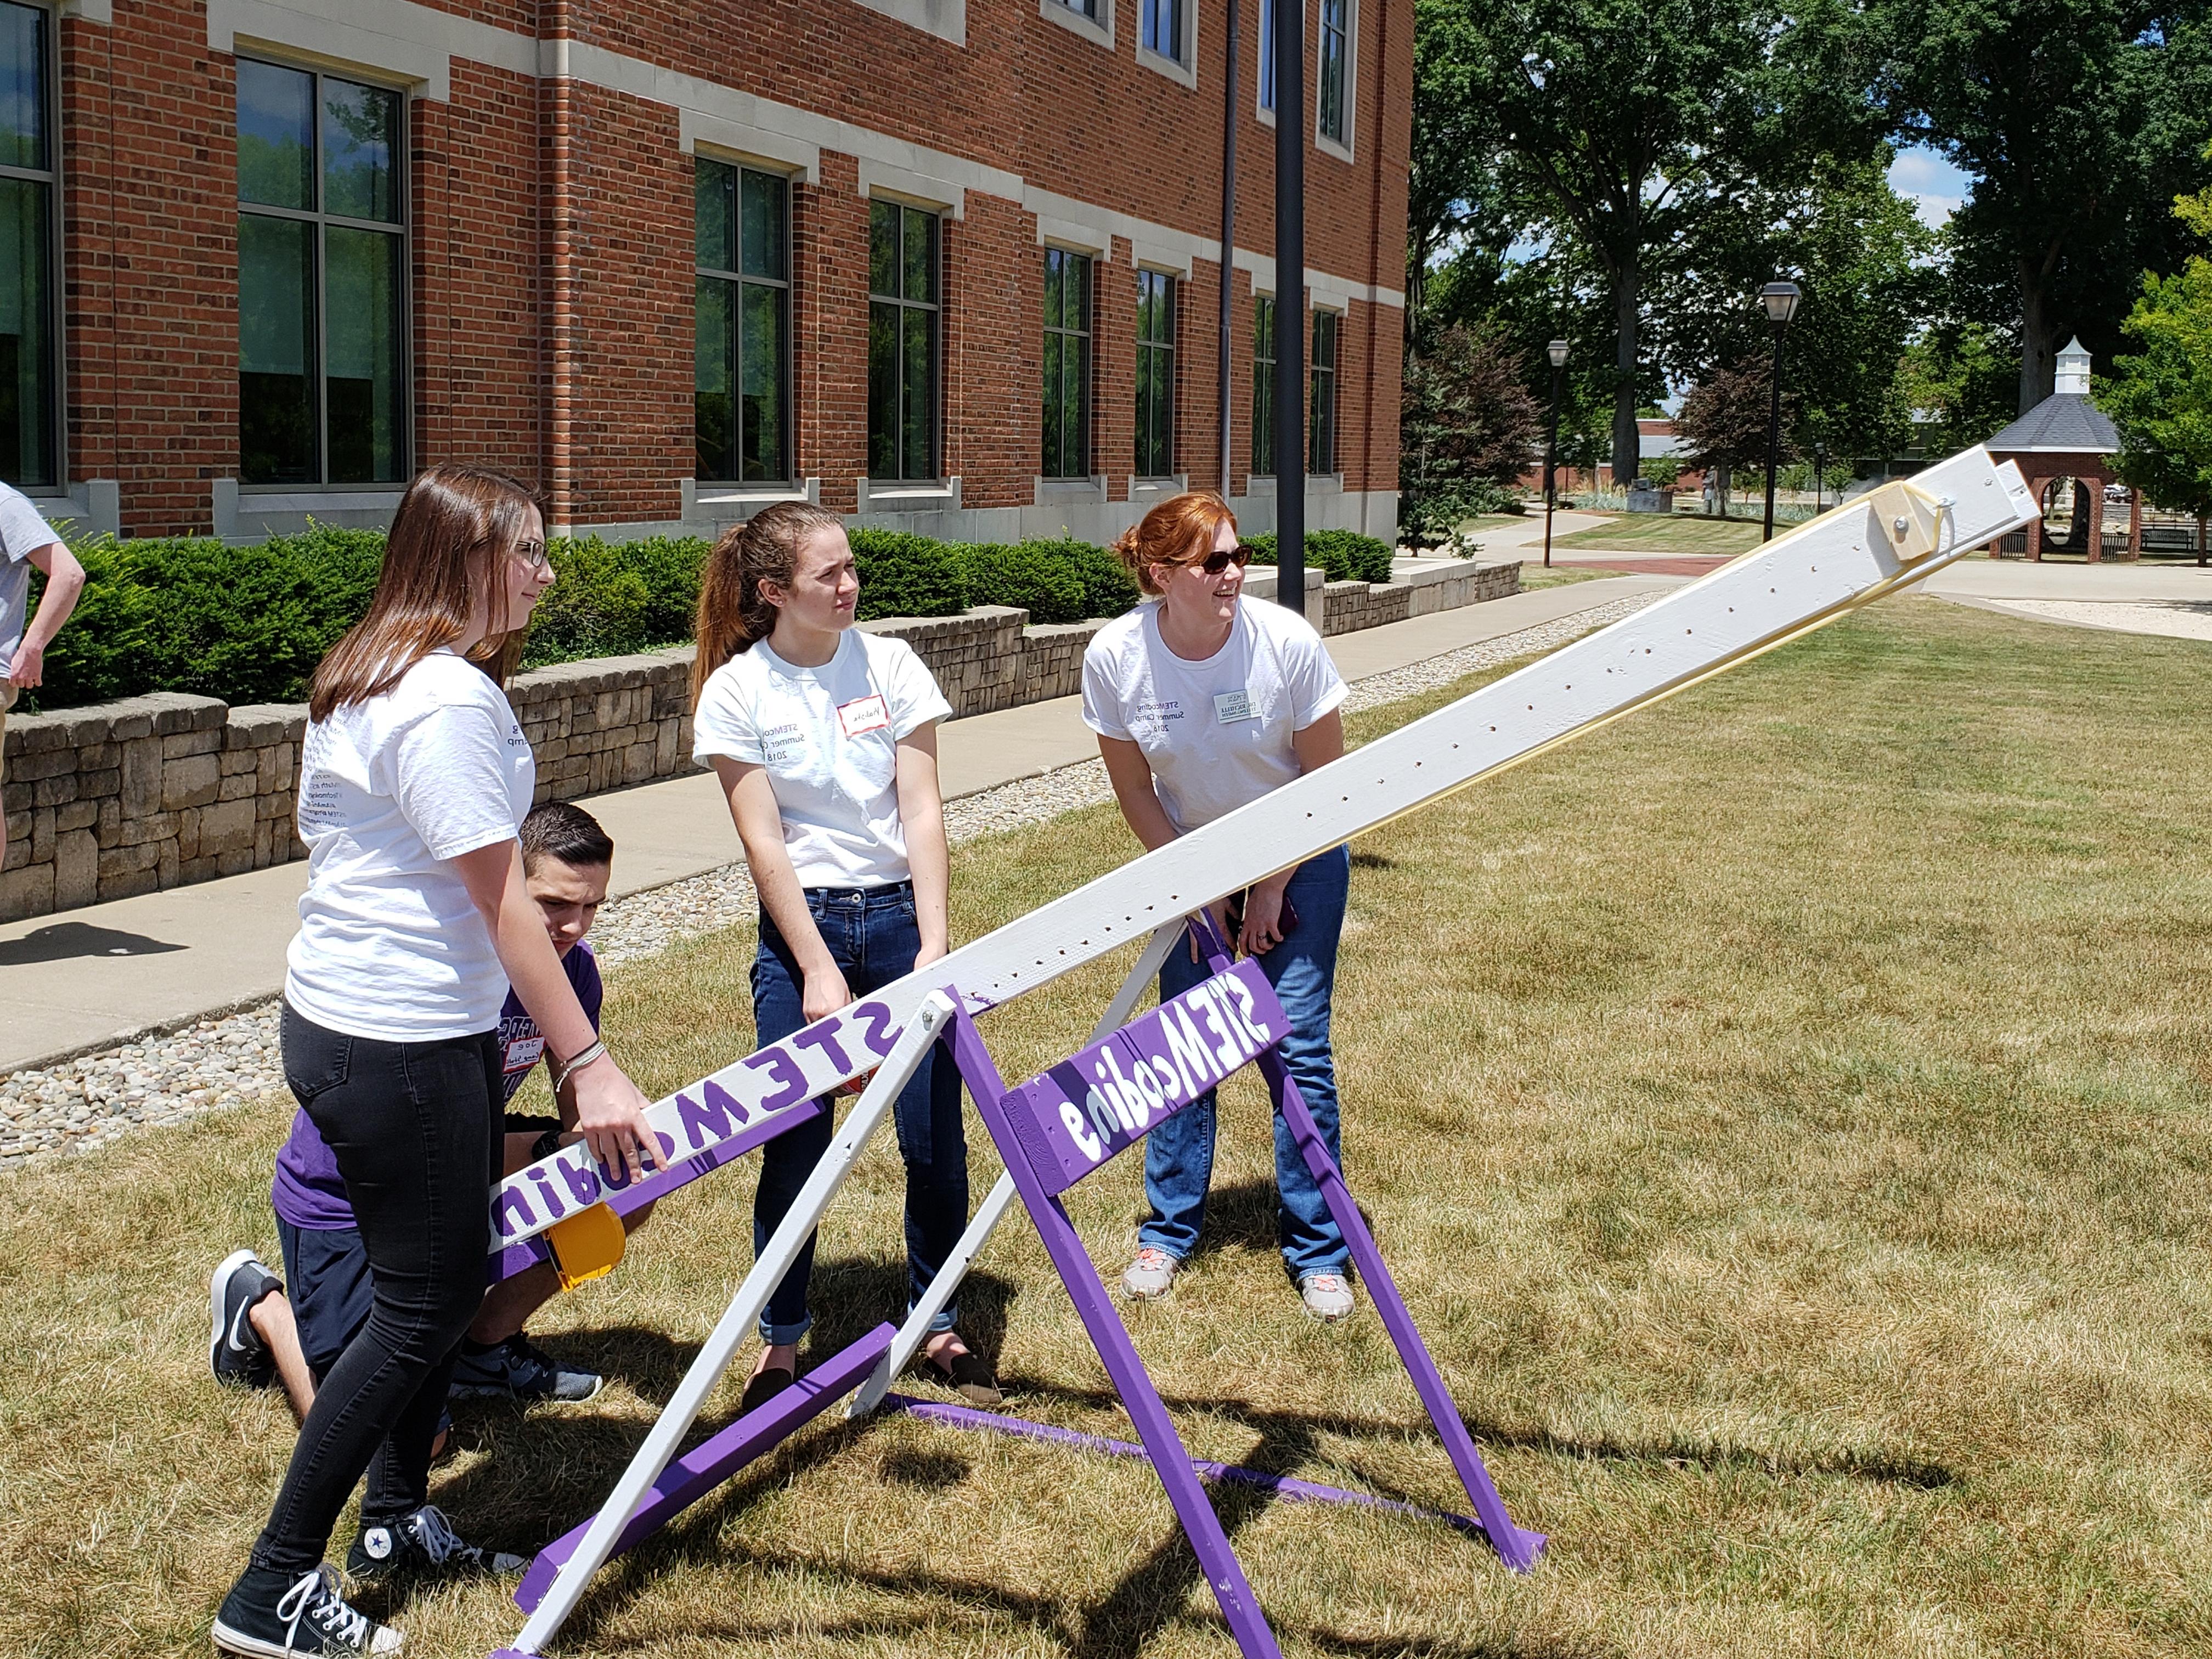 Stemcoding students participate in an experiment with Mount Union faculty member.